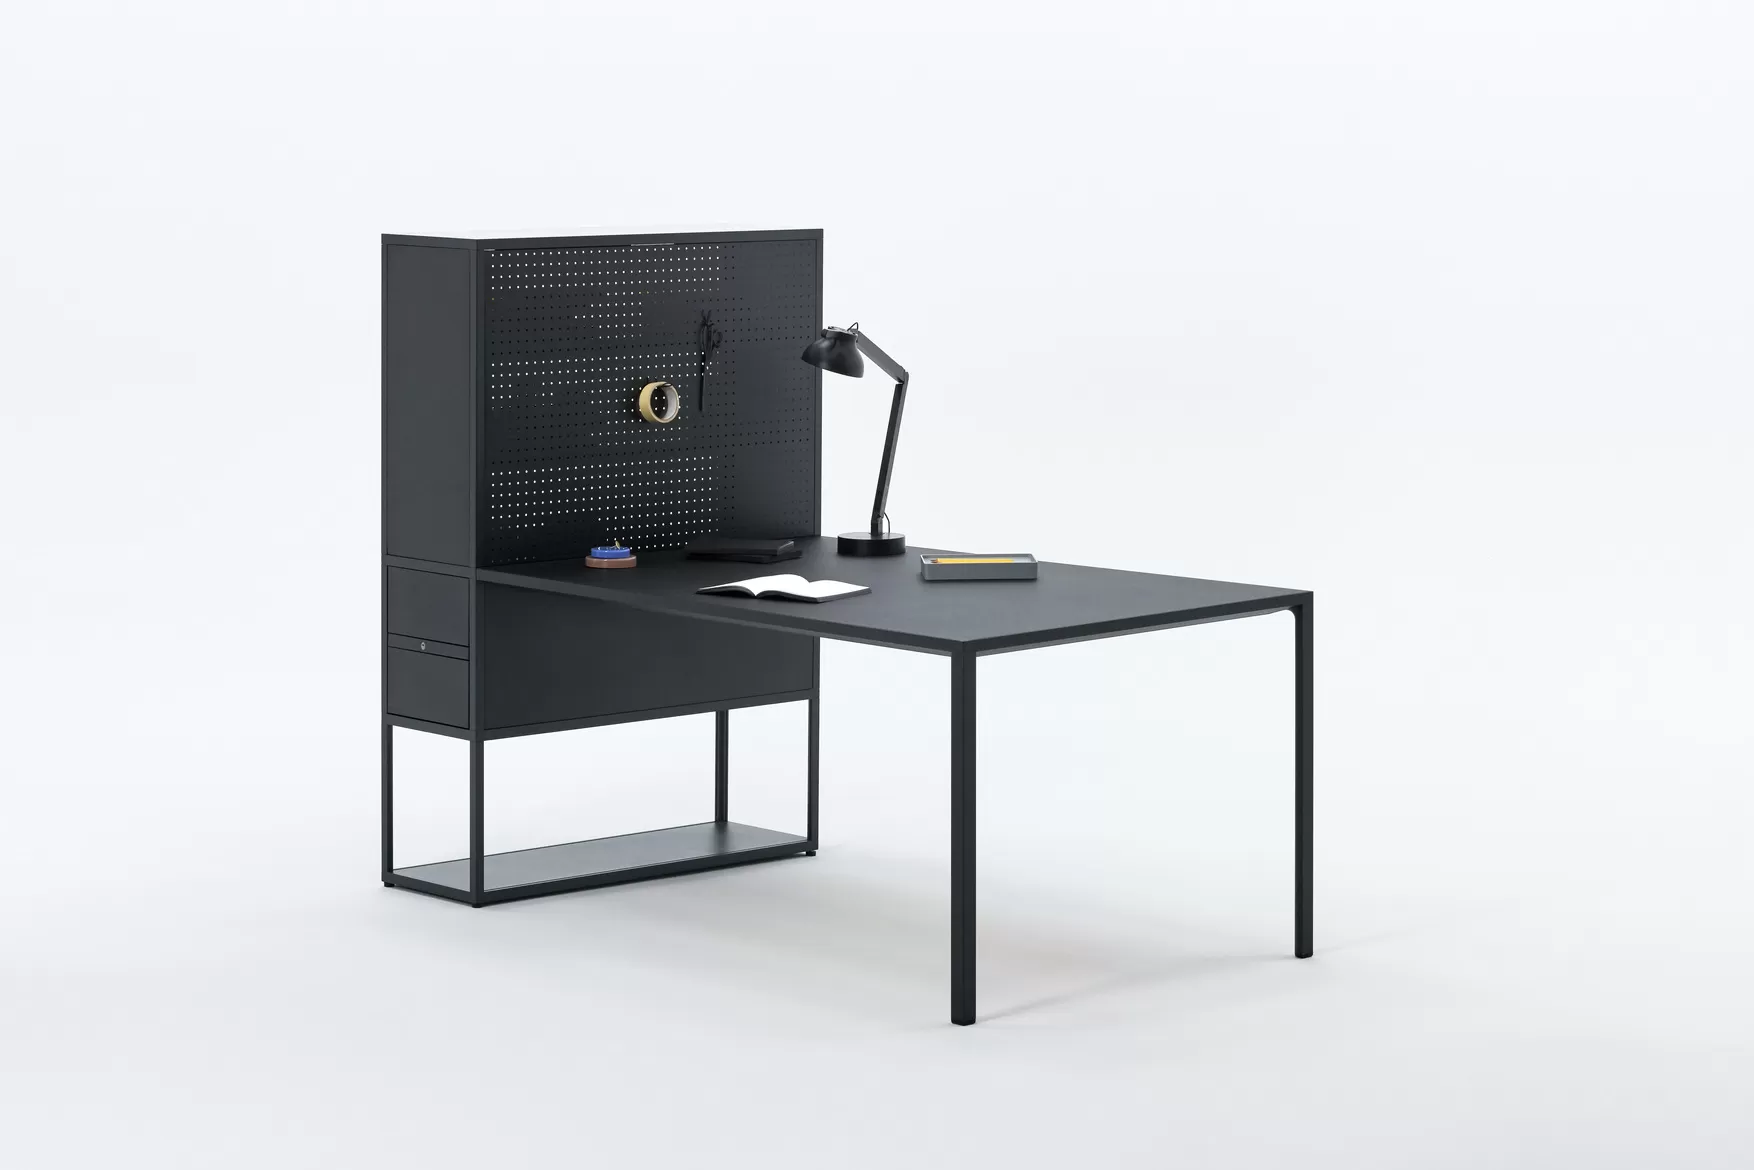 PC DOUBLE ARM W. TABLE INSERT | Herman miller